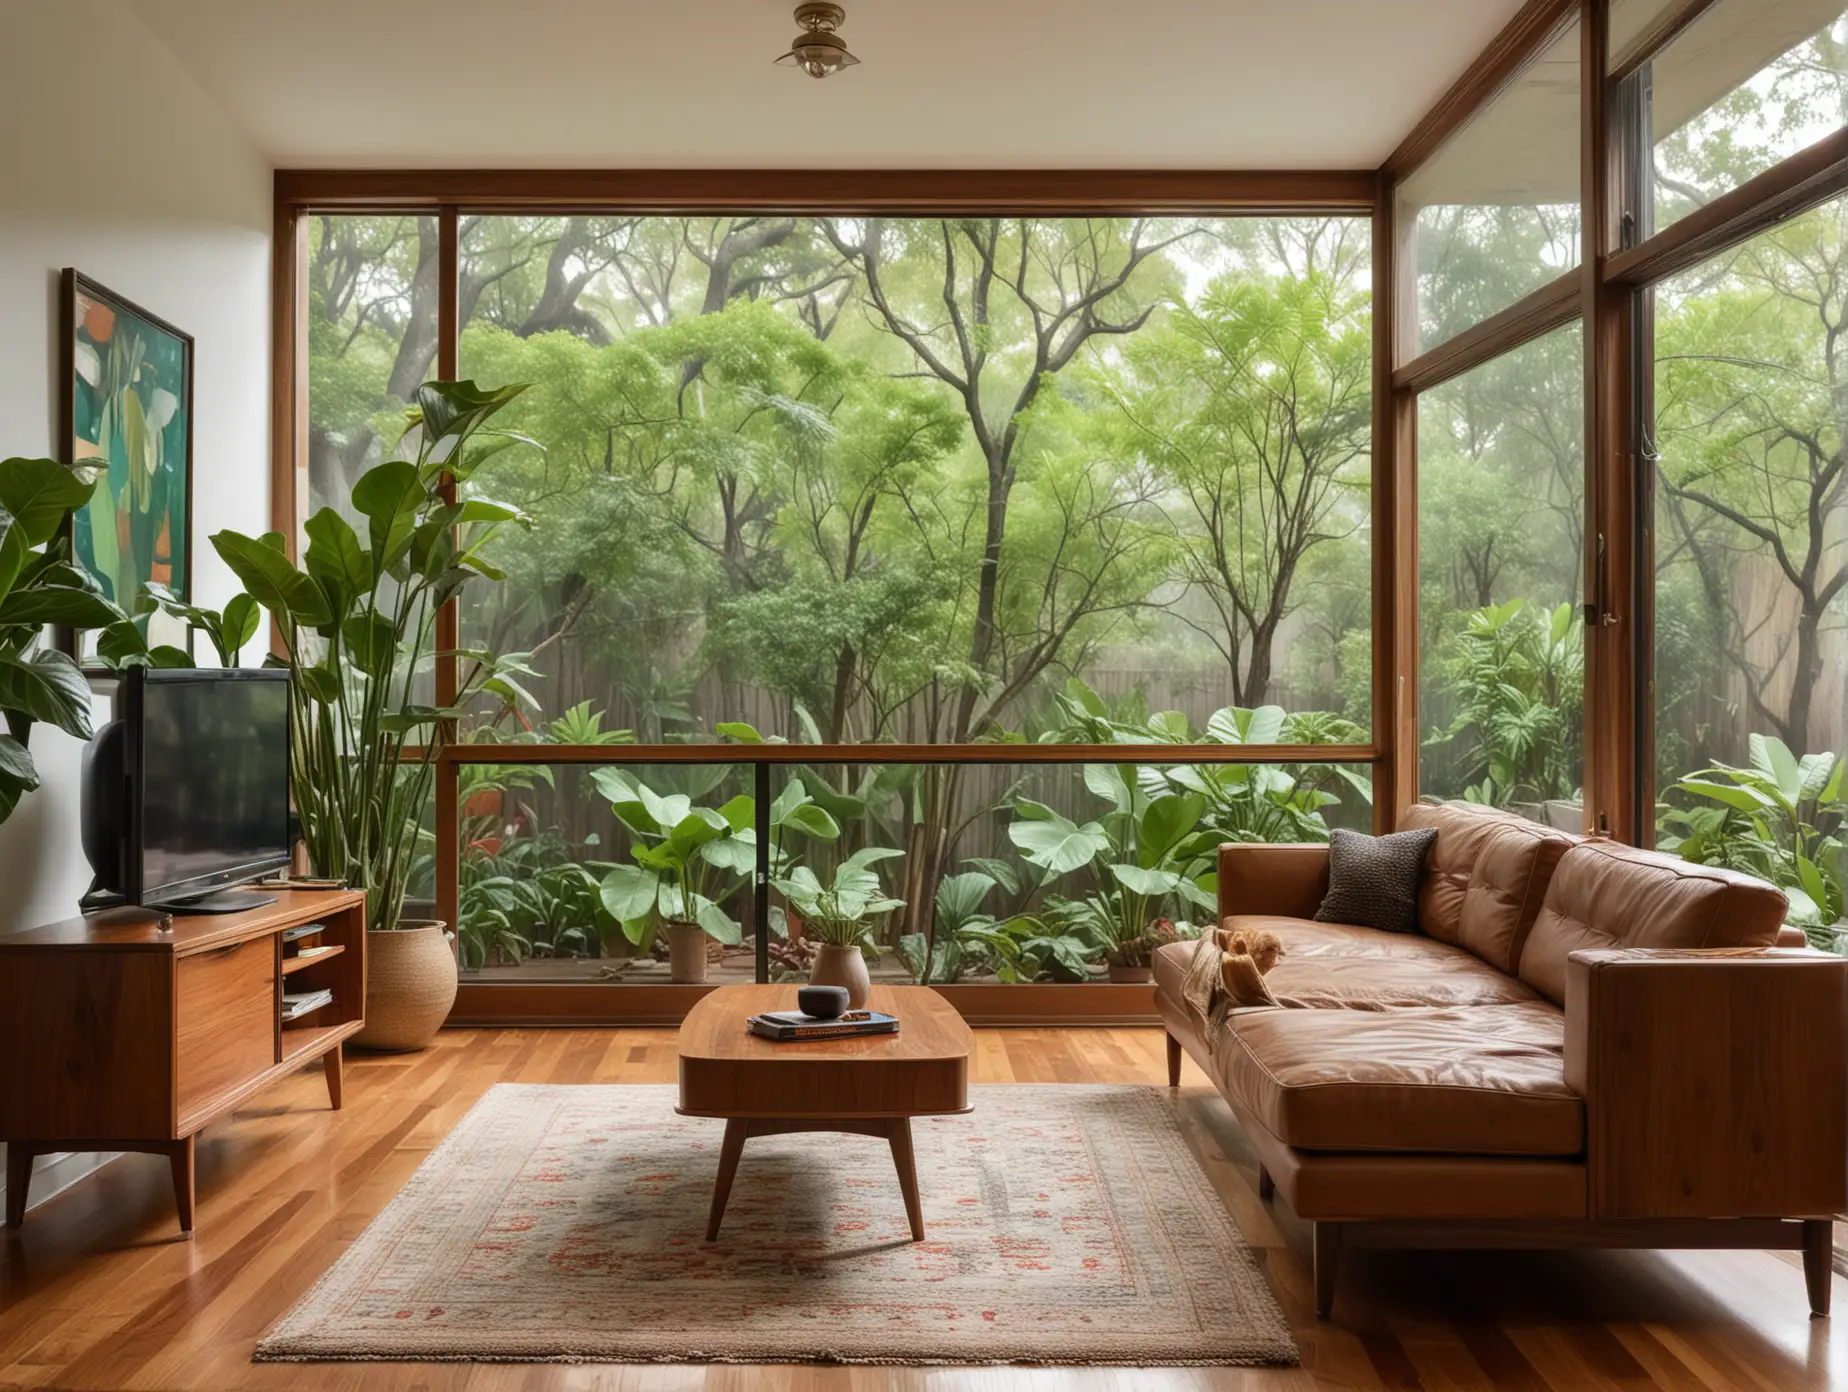 MidCentury-Modern-Living-Room-with-LSection-Sofas-and-Panoramic-Rainy-Backyard-View